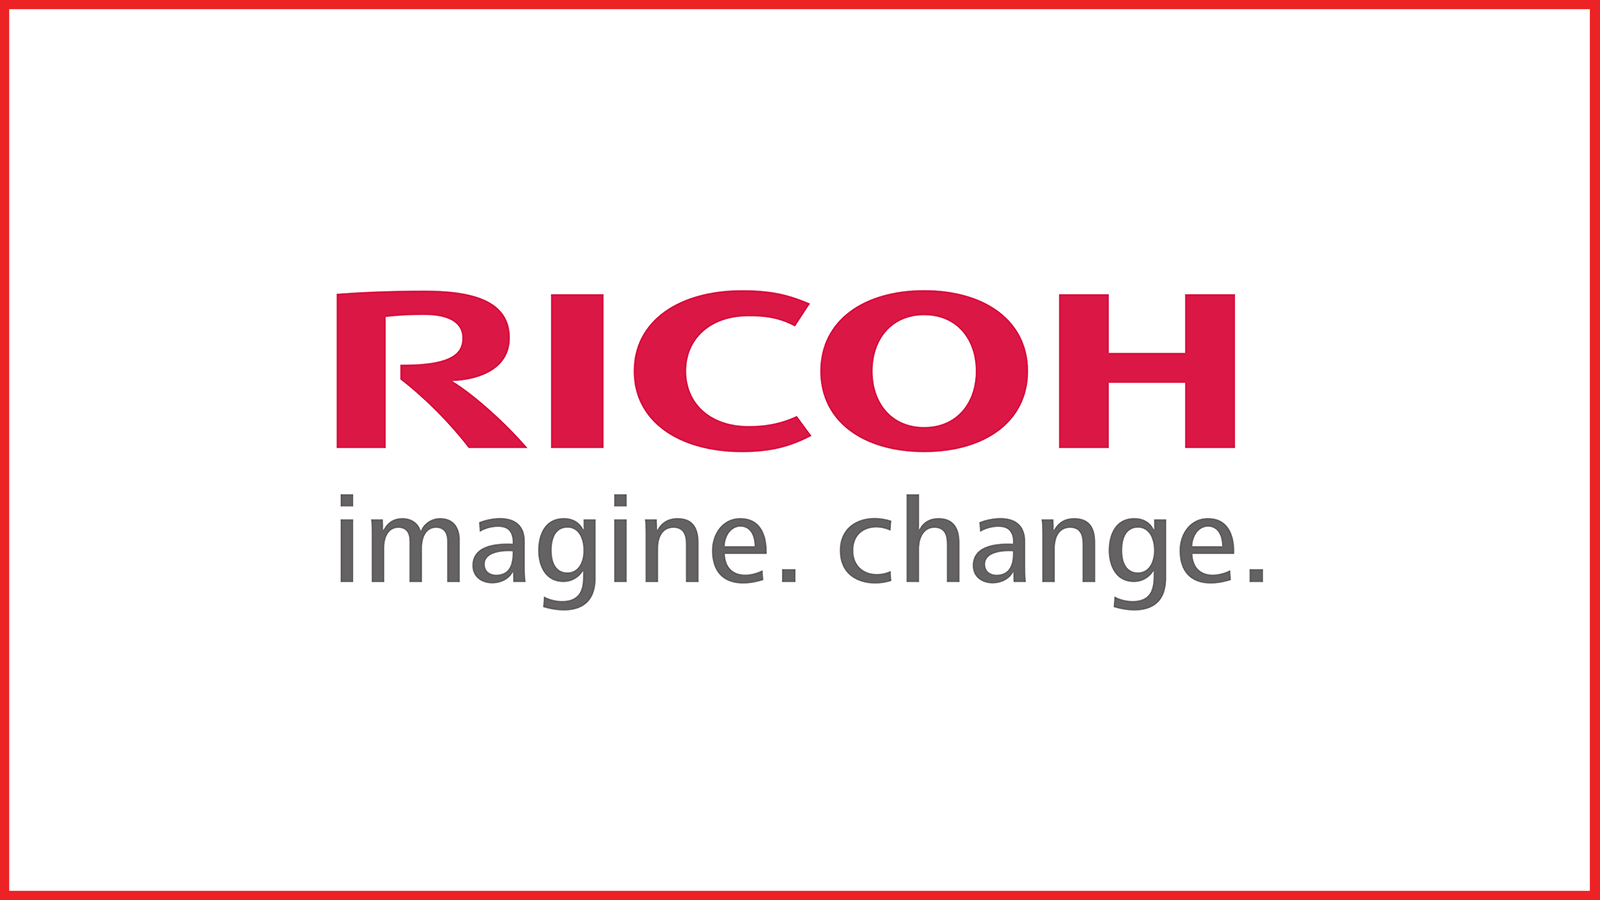 richoh logo with red border. it says 